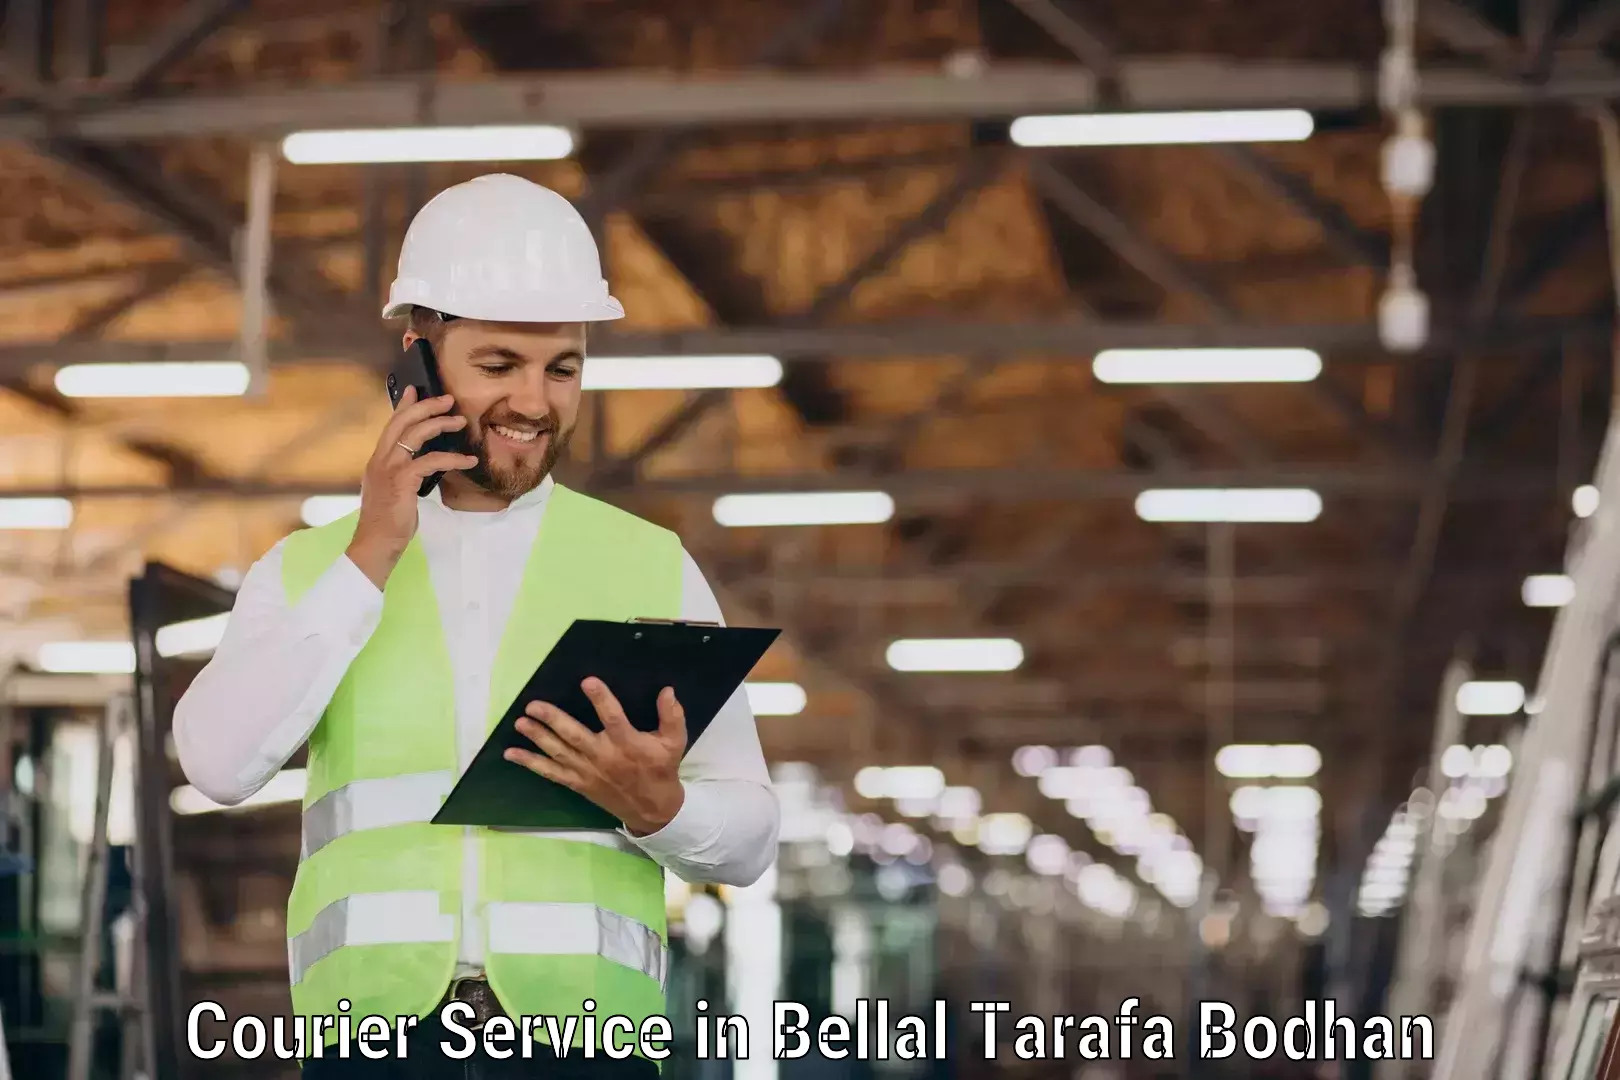 Express delivery solutions in Bellal Tarafa Bodhan